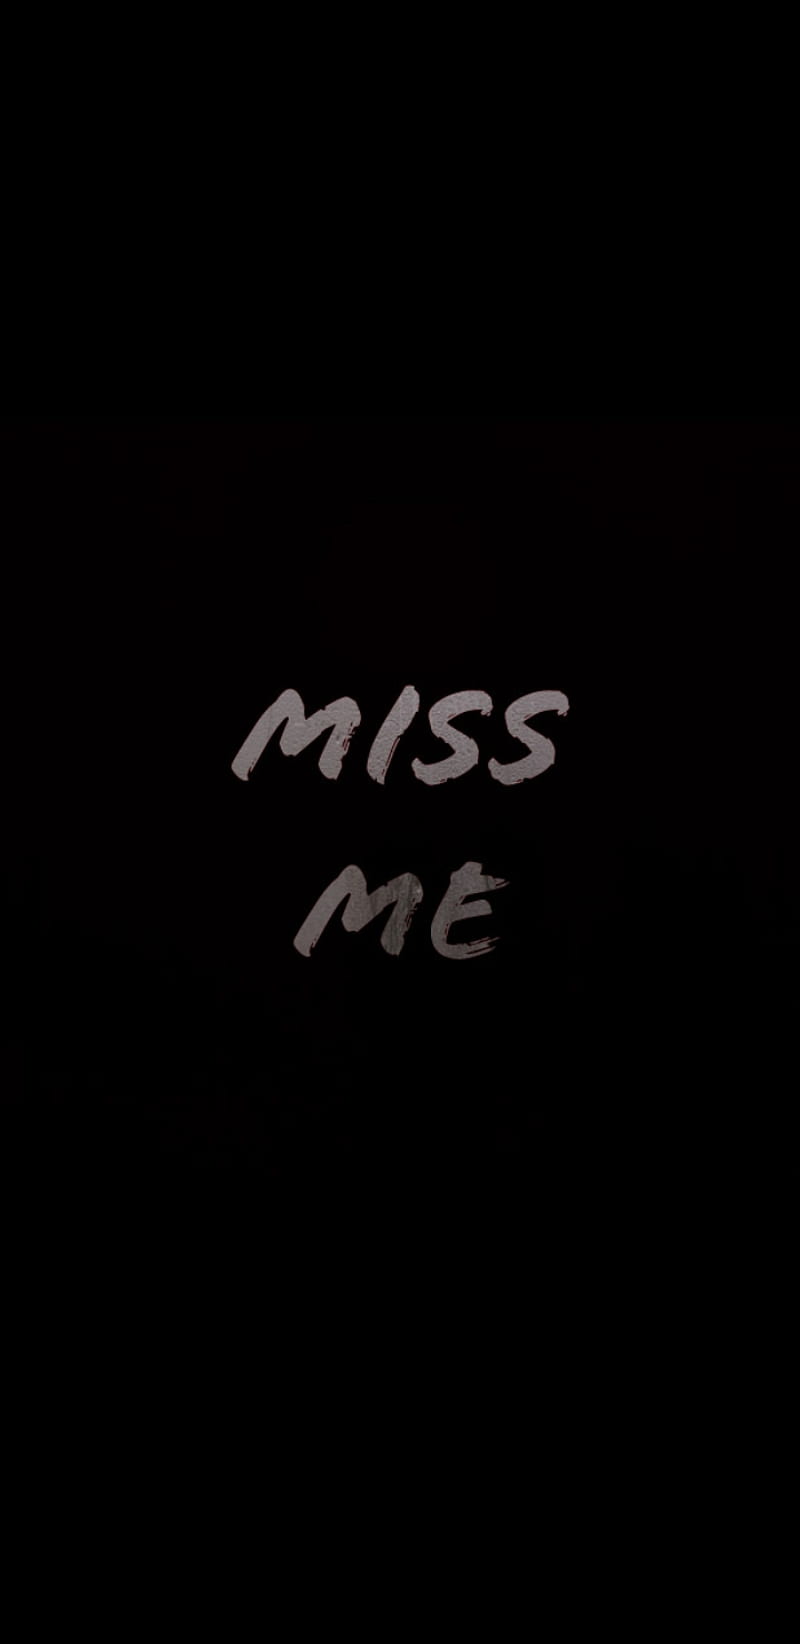 Miss me, message, missing, HD phone wallpaper